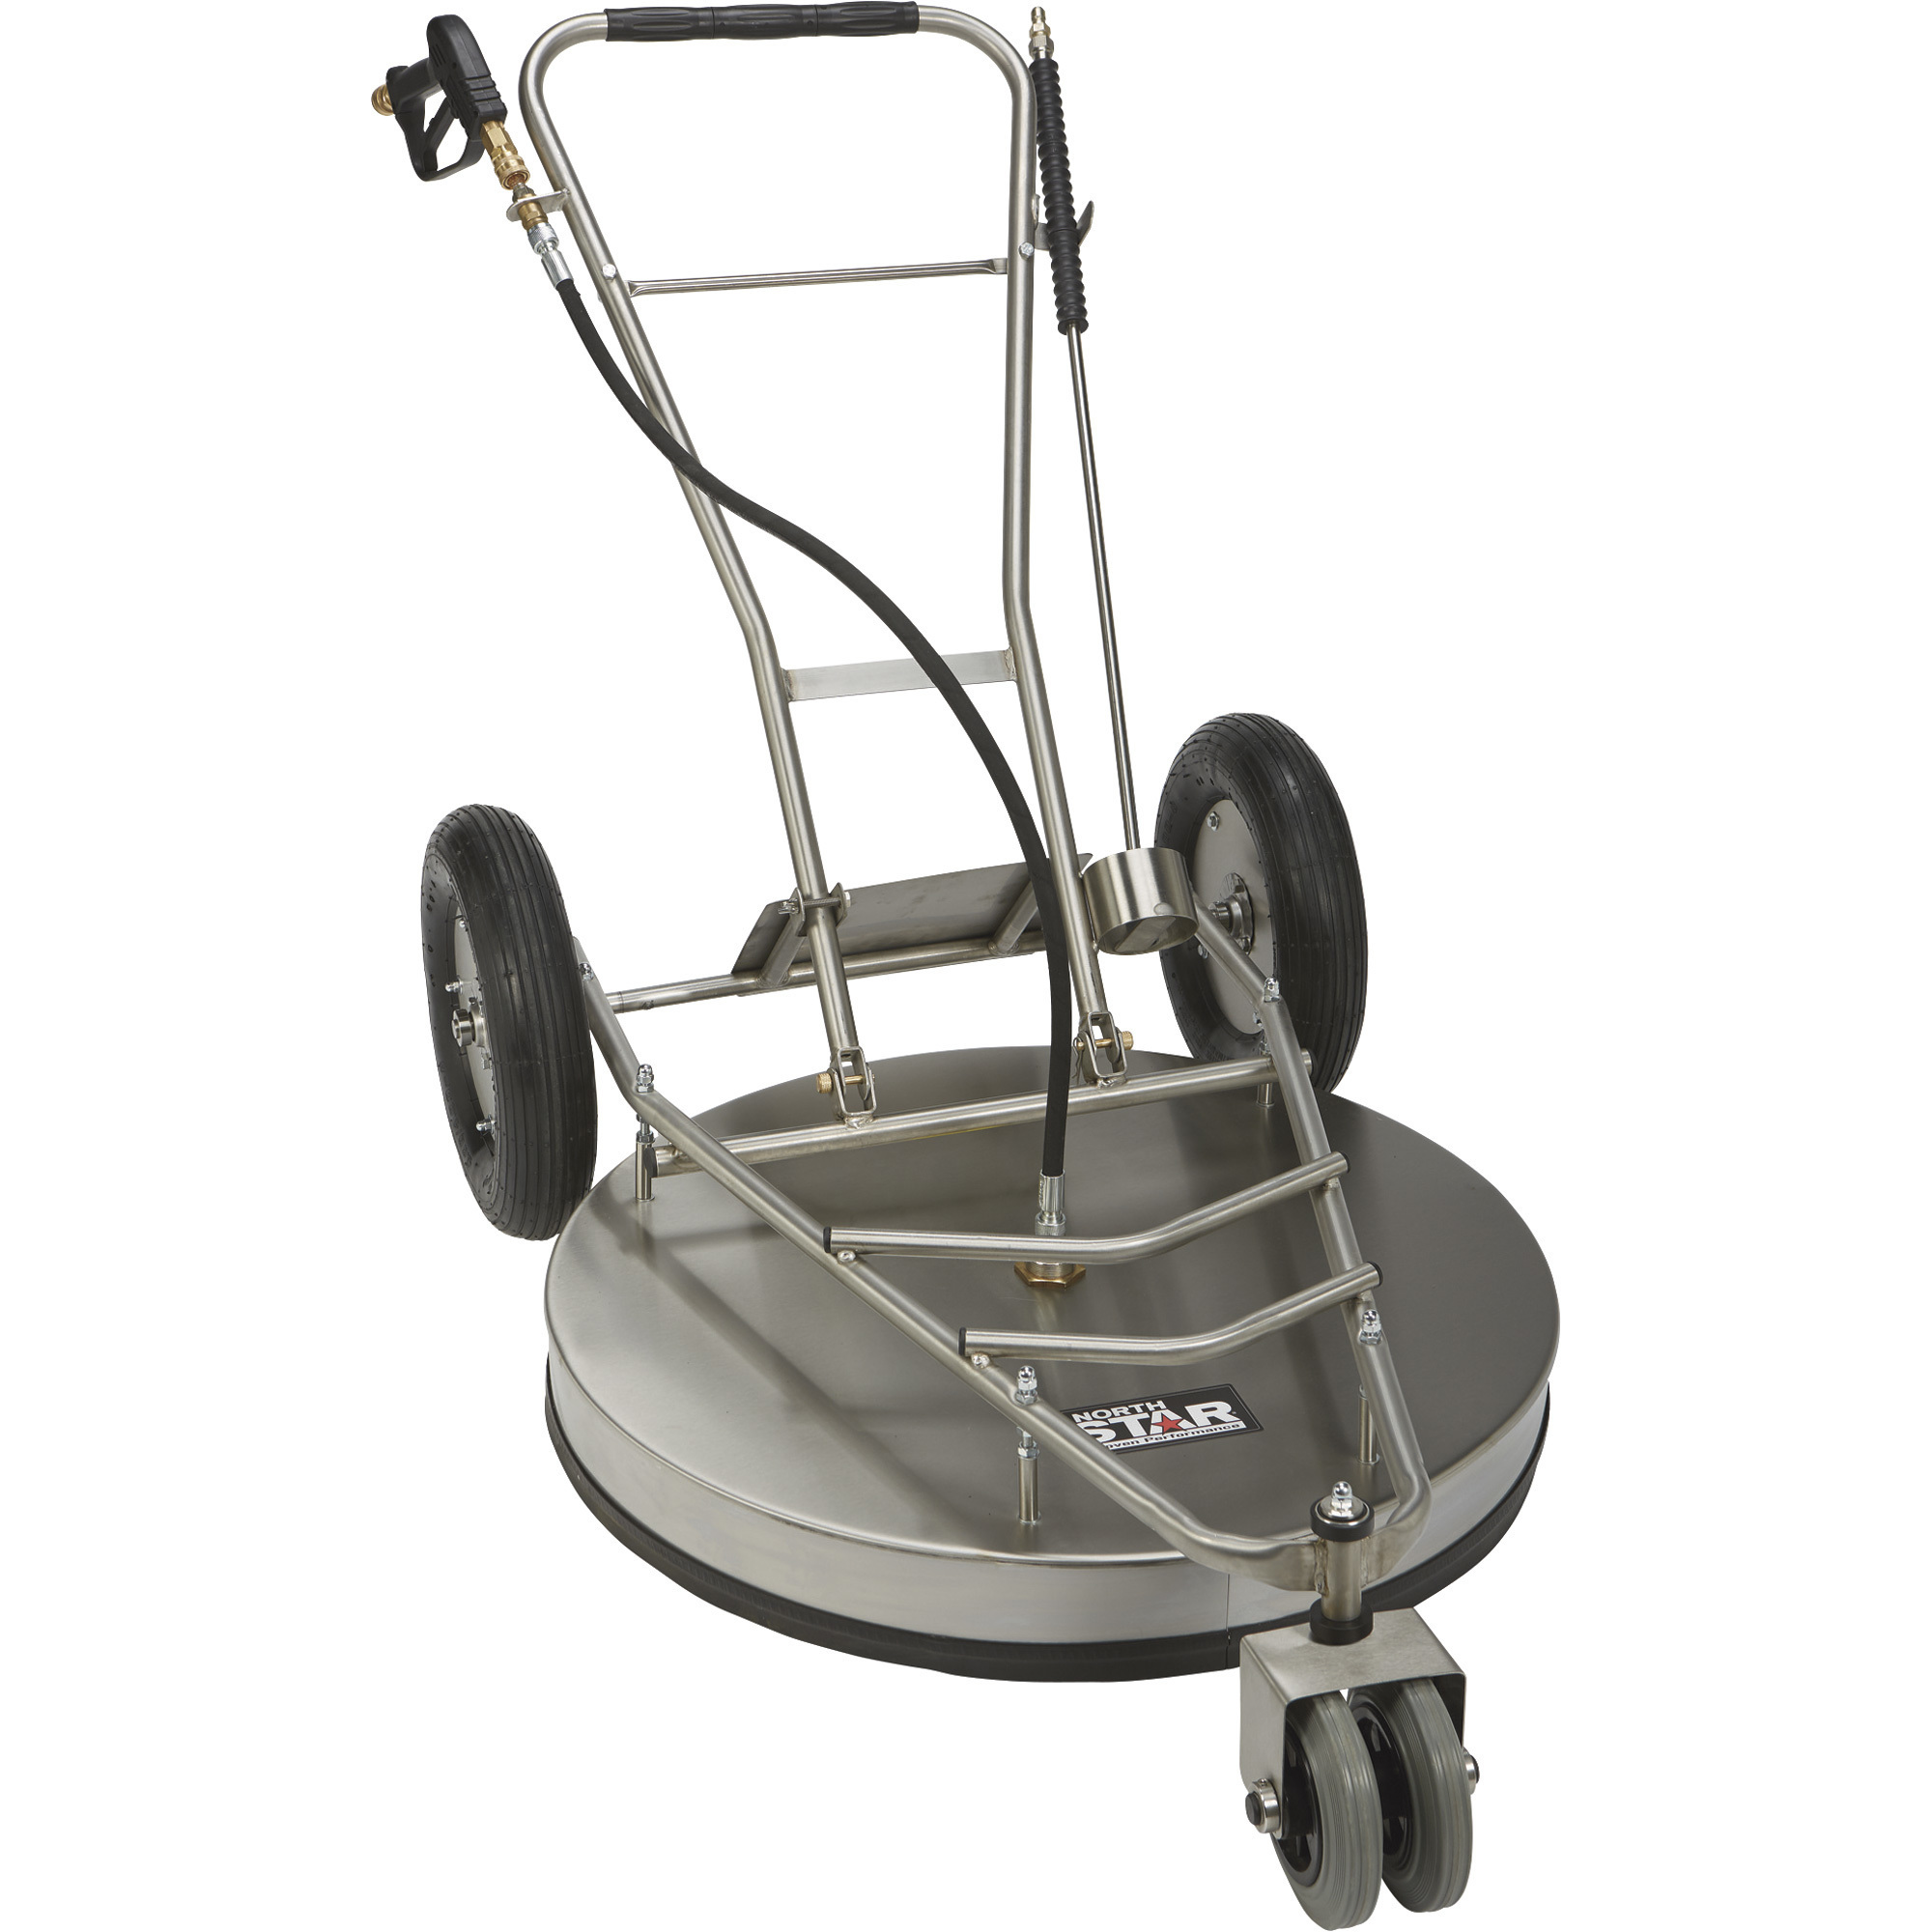 NorthStar Pressure Washer Surface Cleaner, 32Inch Diameter, 5000 PSI, 8 GPM